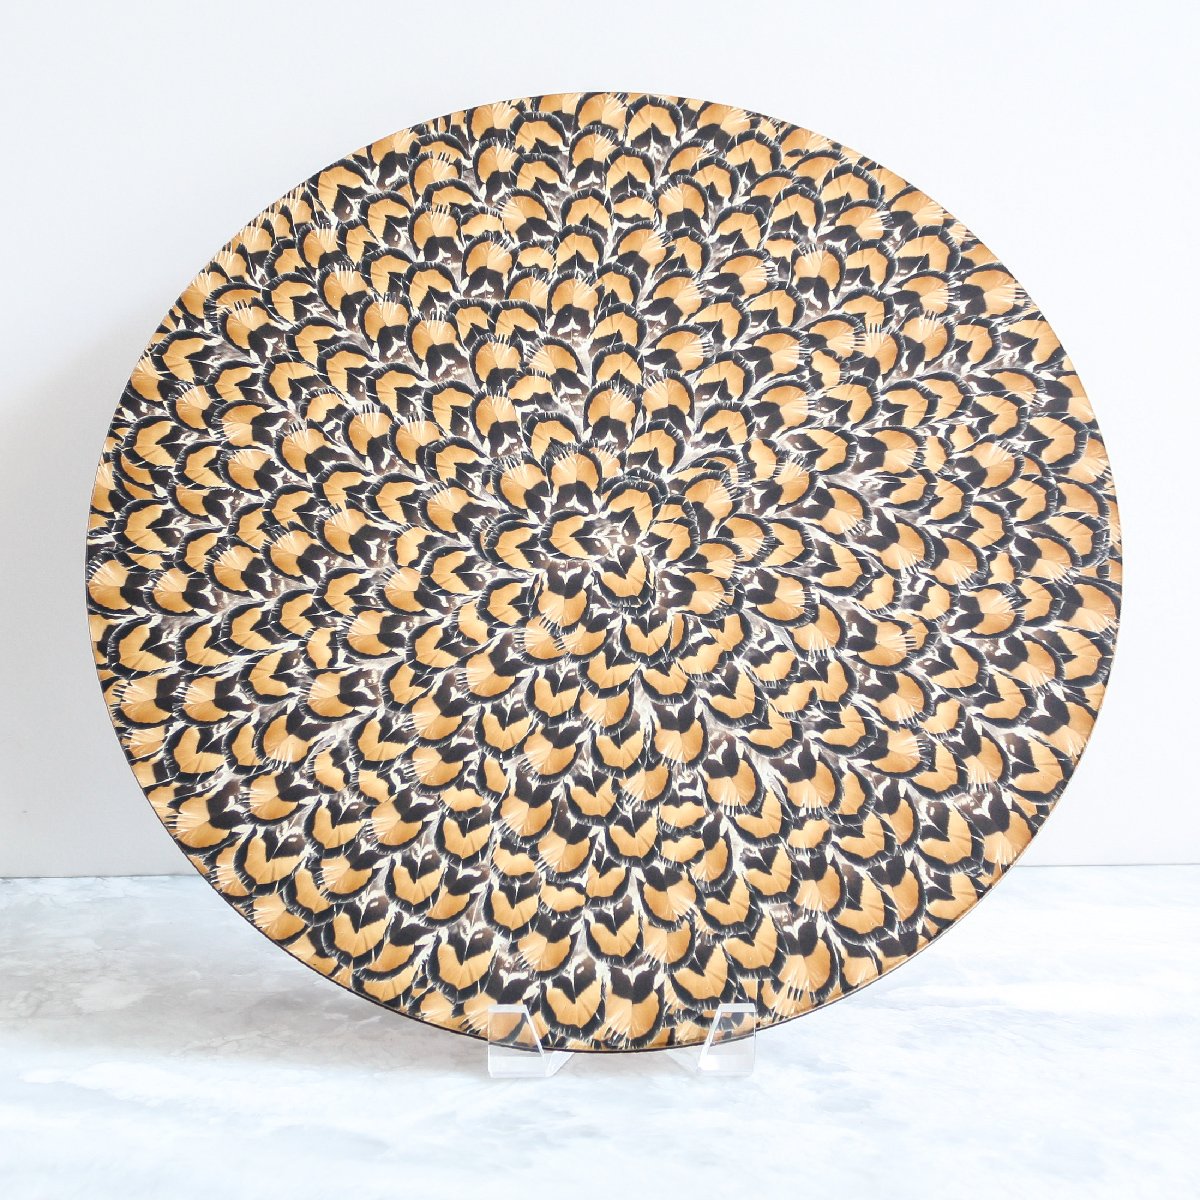 dark reeves pheasant feathers placemat made with cork and wood in blue and green by Tisch New York